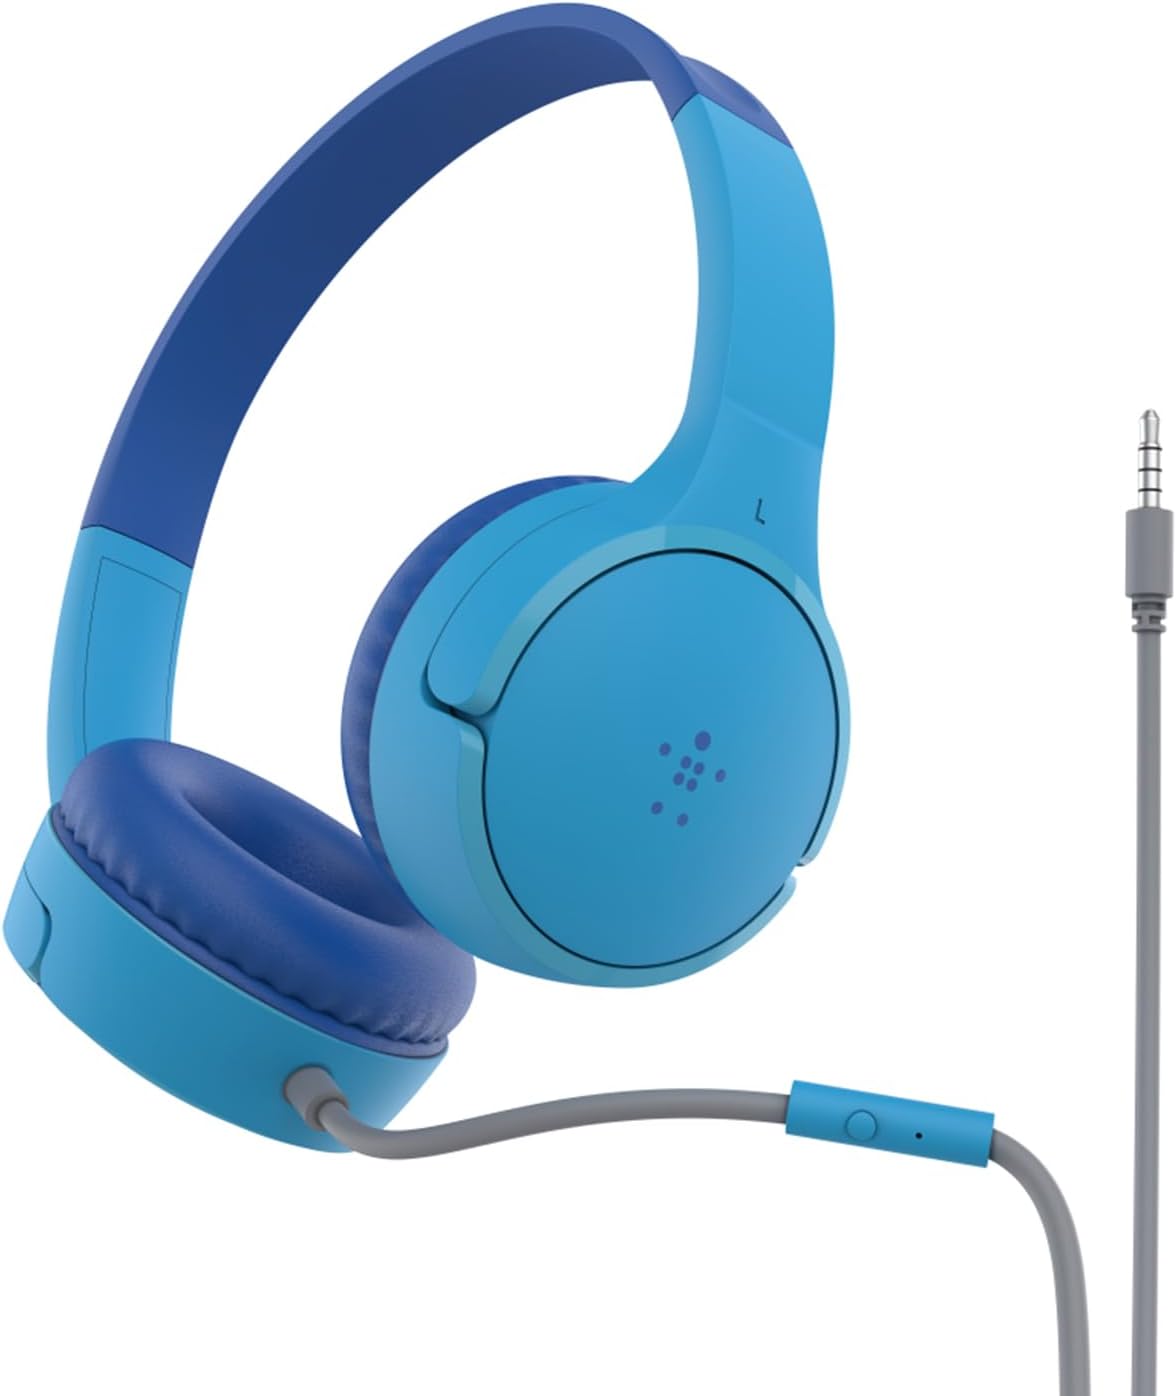 Belkin SoundForm Mini Wired On-Ear for Over-Ear Headset for Children with inline Microphone for Online Learning, School, Travel, Play, For 3.5mm Compatible Devices - Blue, Kids Headphones (Wired)